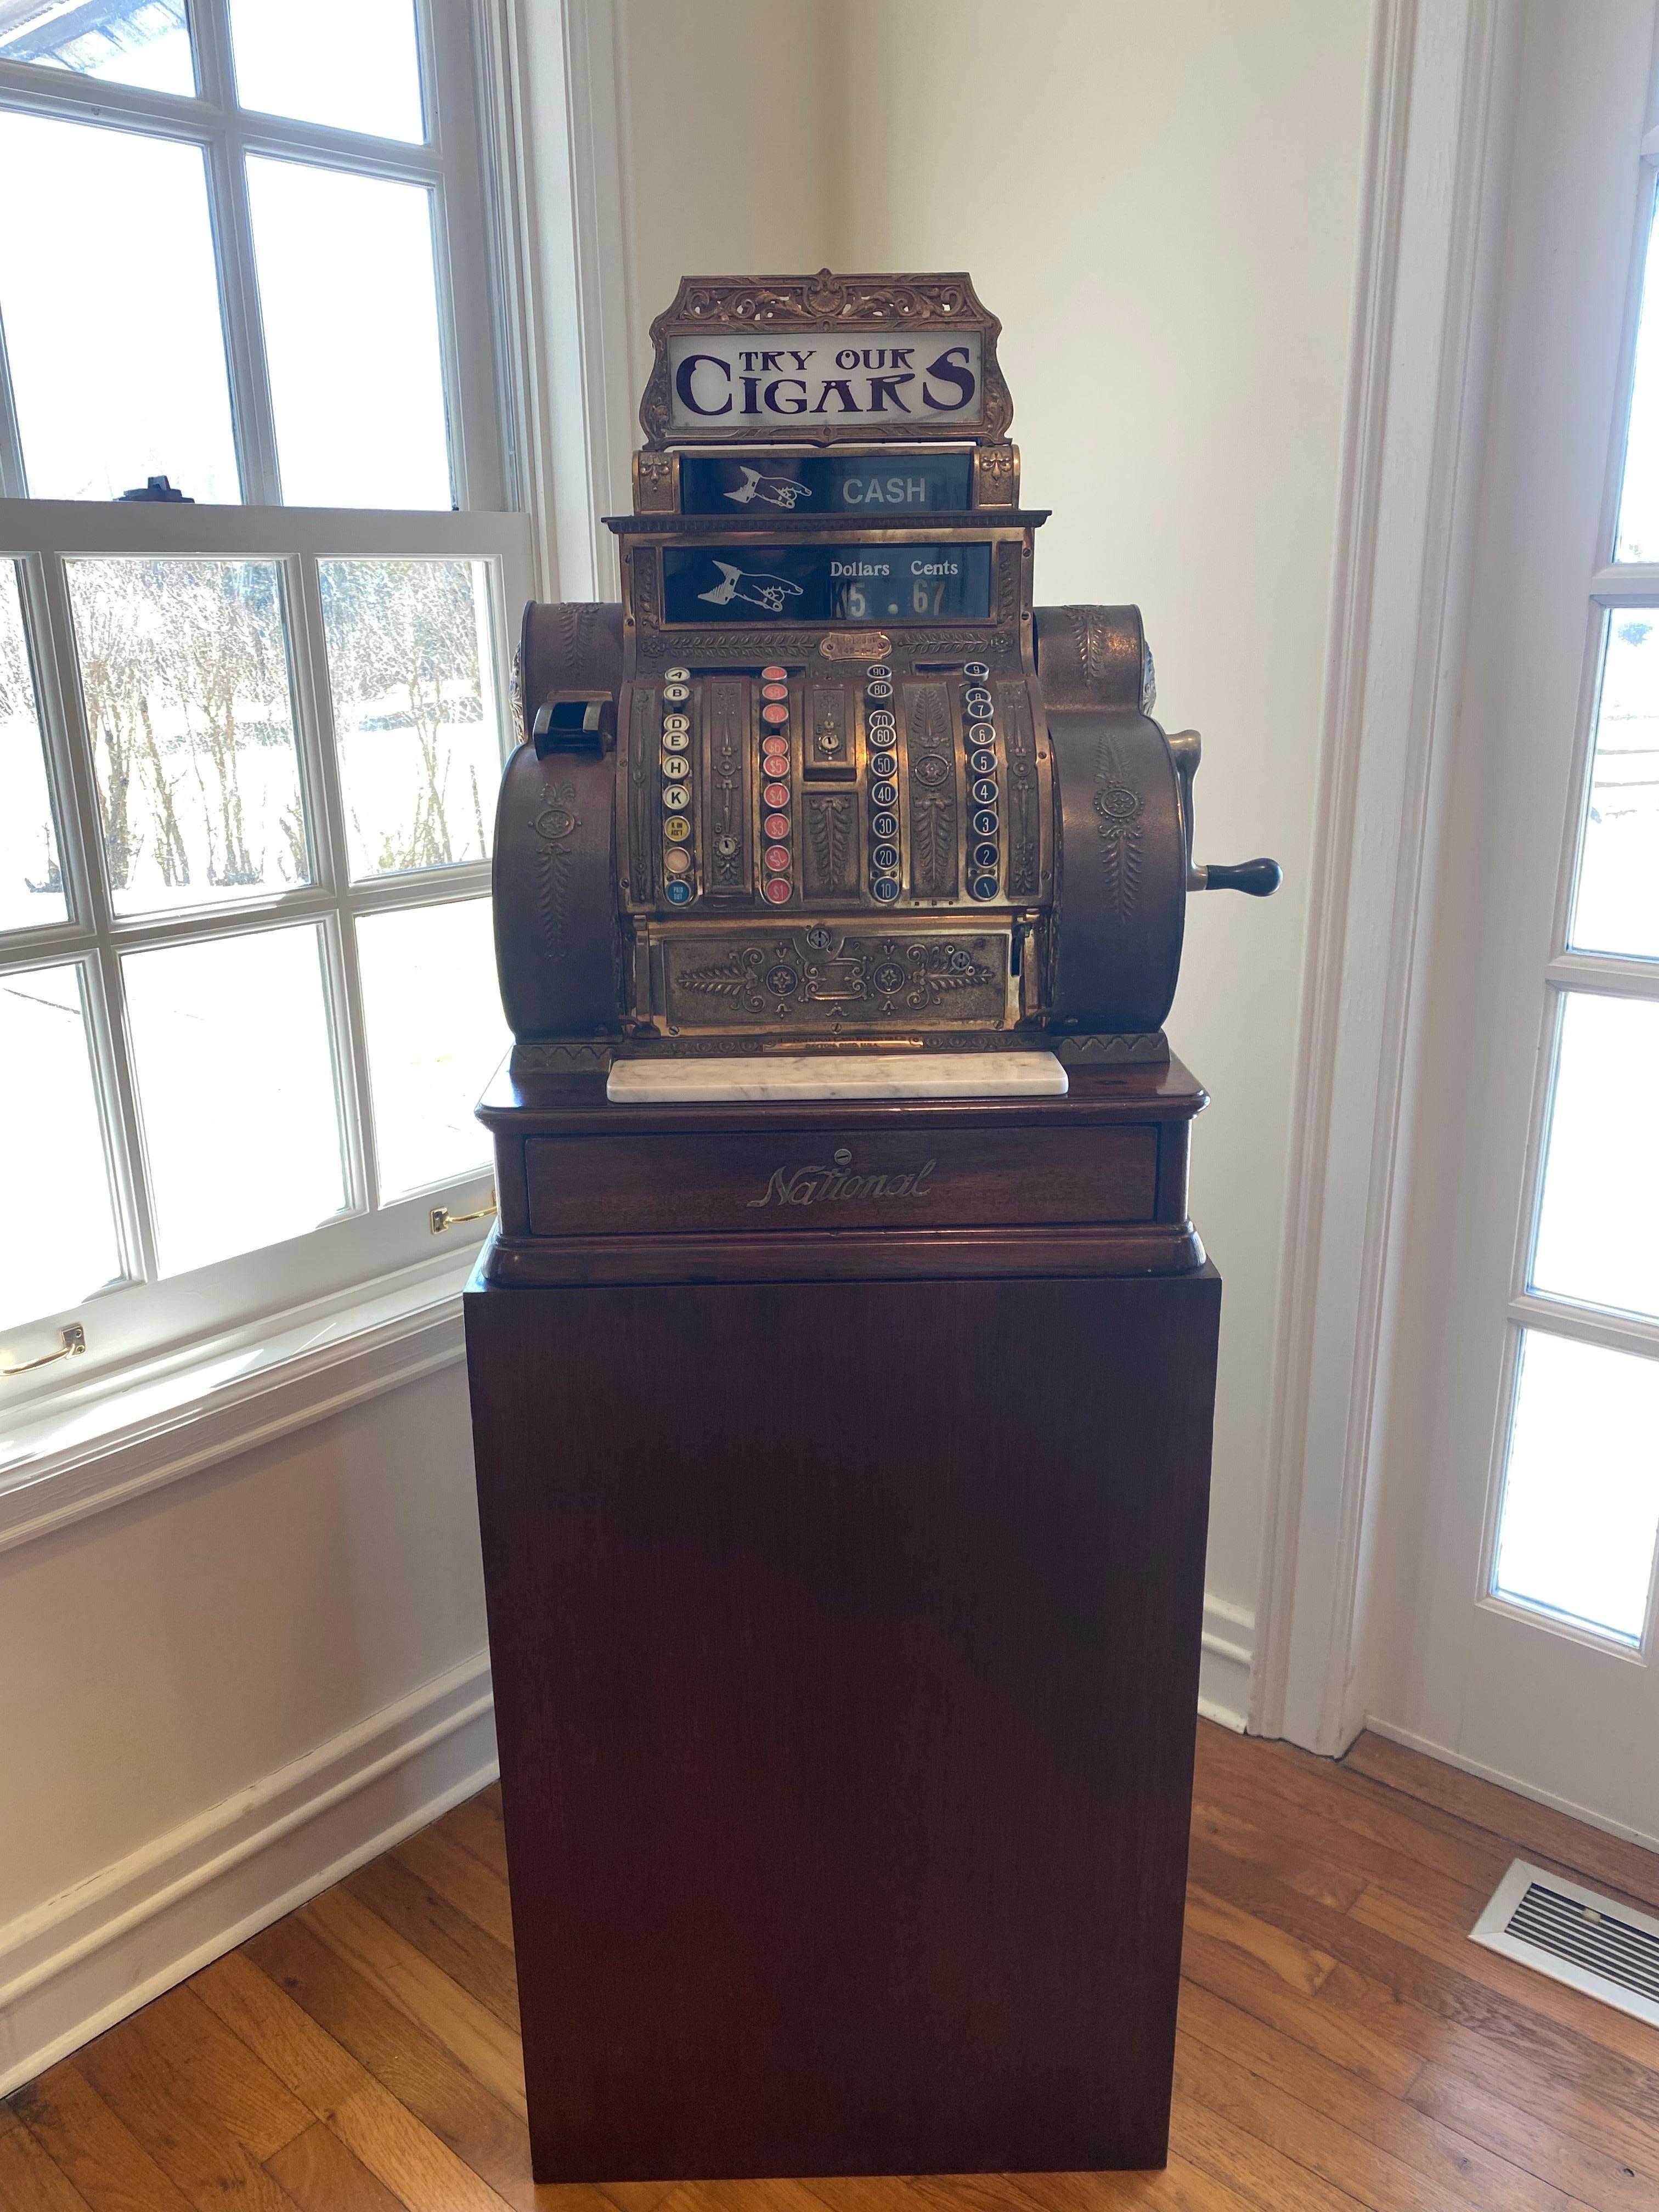 National Cash Register Co. Brass Cash Register, Model 442-E-L, Early 1900s, on wooden plinth.
American. Brass. In 1908, National introduced a new numbering system that grouped their various designs into classes. This brass register, assembled in the